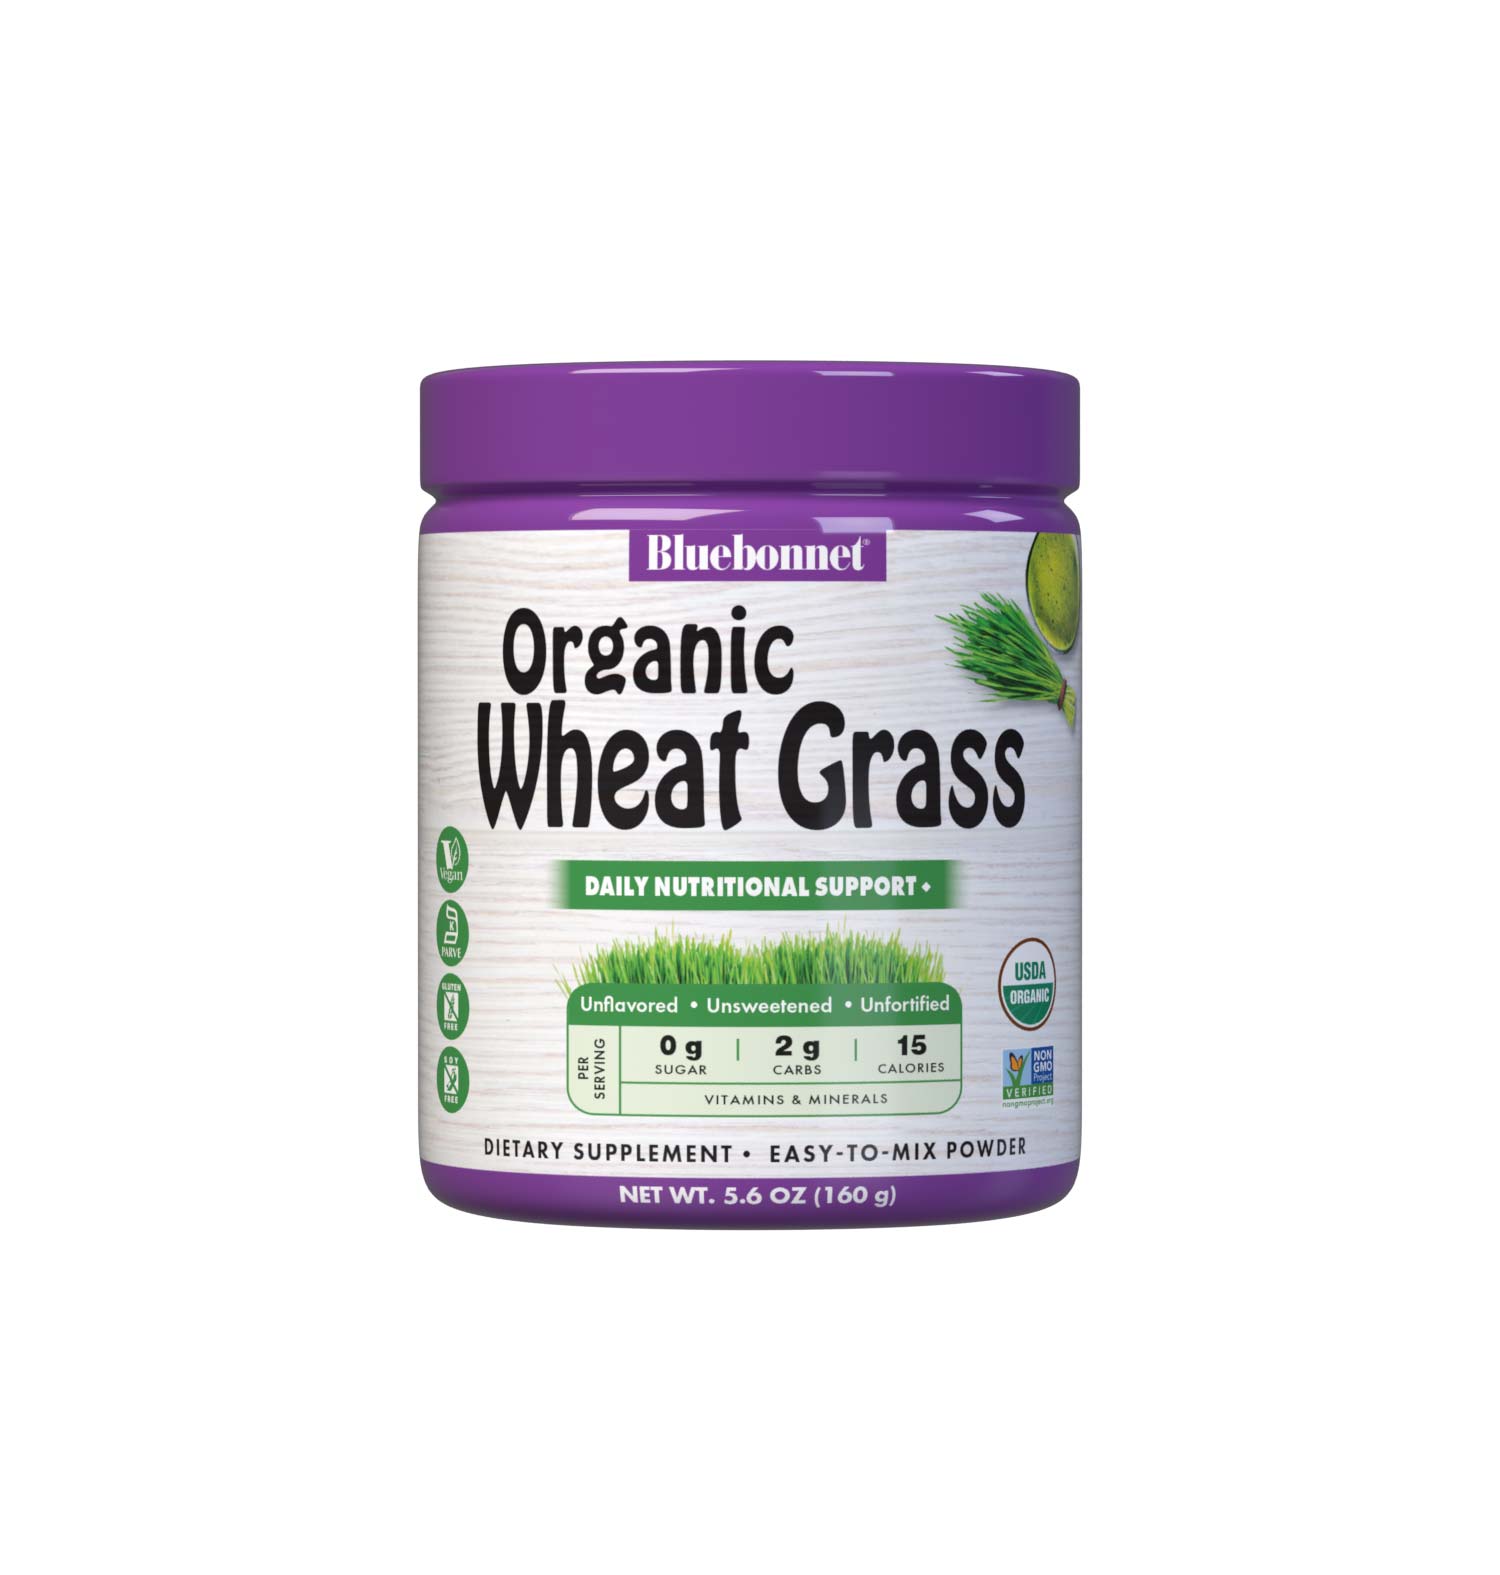 Bluebonnet’s Organic WheatGrass Powder provides 100% organic certified and non-GMO verified wheatgrass with no added sweeteners, flavors or colors. #size_5.6oz